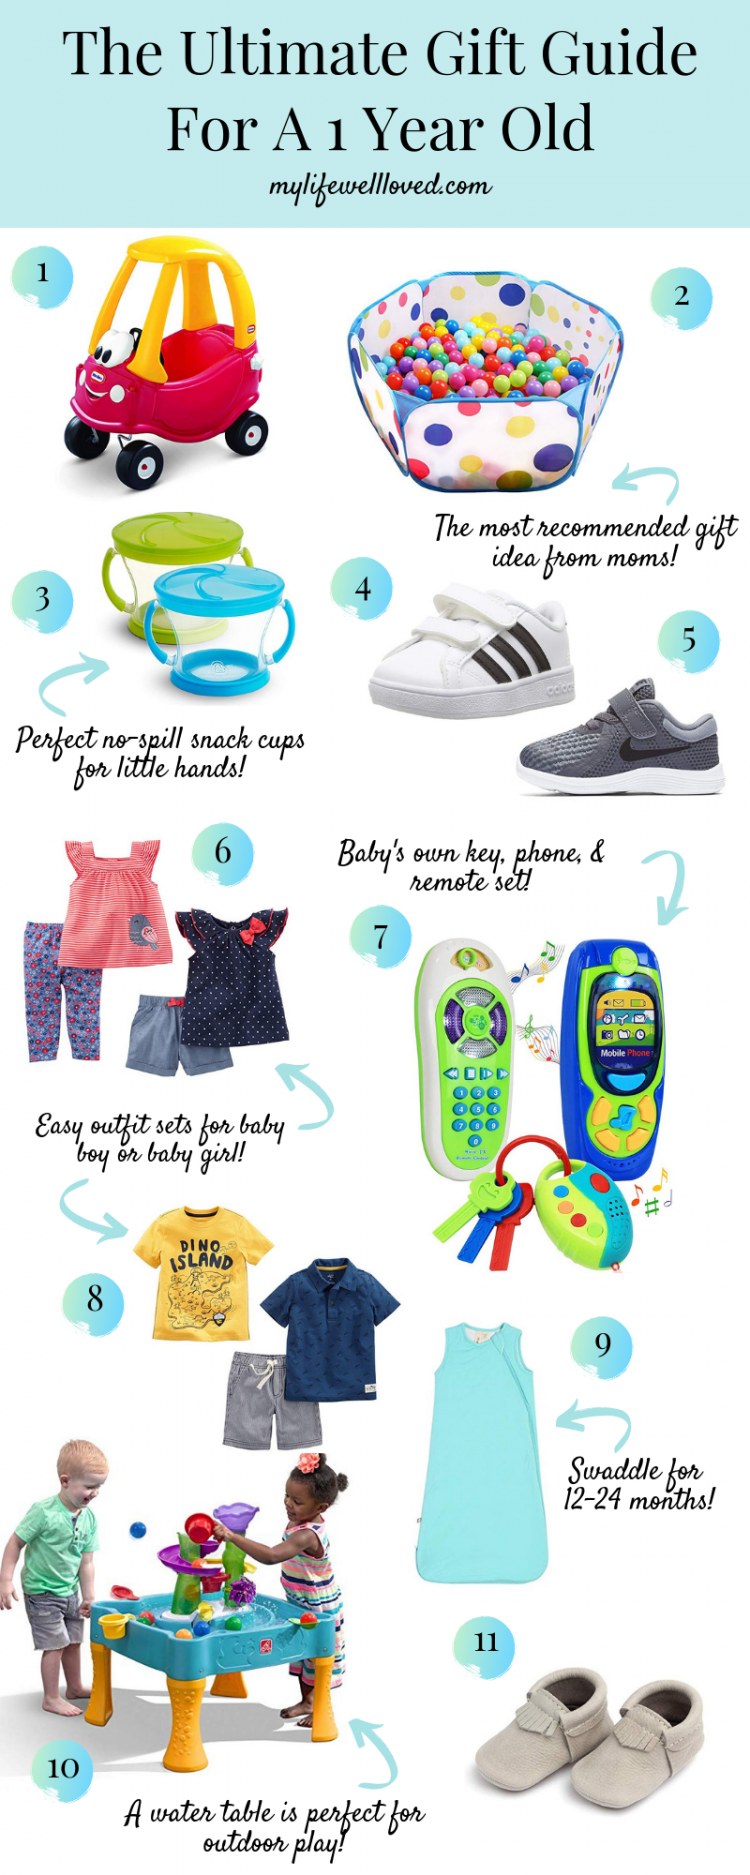 The Ultimate Gift Guide for a 1 Year Old by Life + Style blogger, Heather Brown // My Life Well Loved